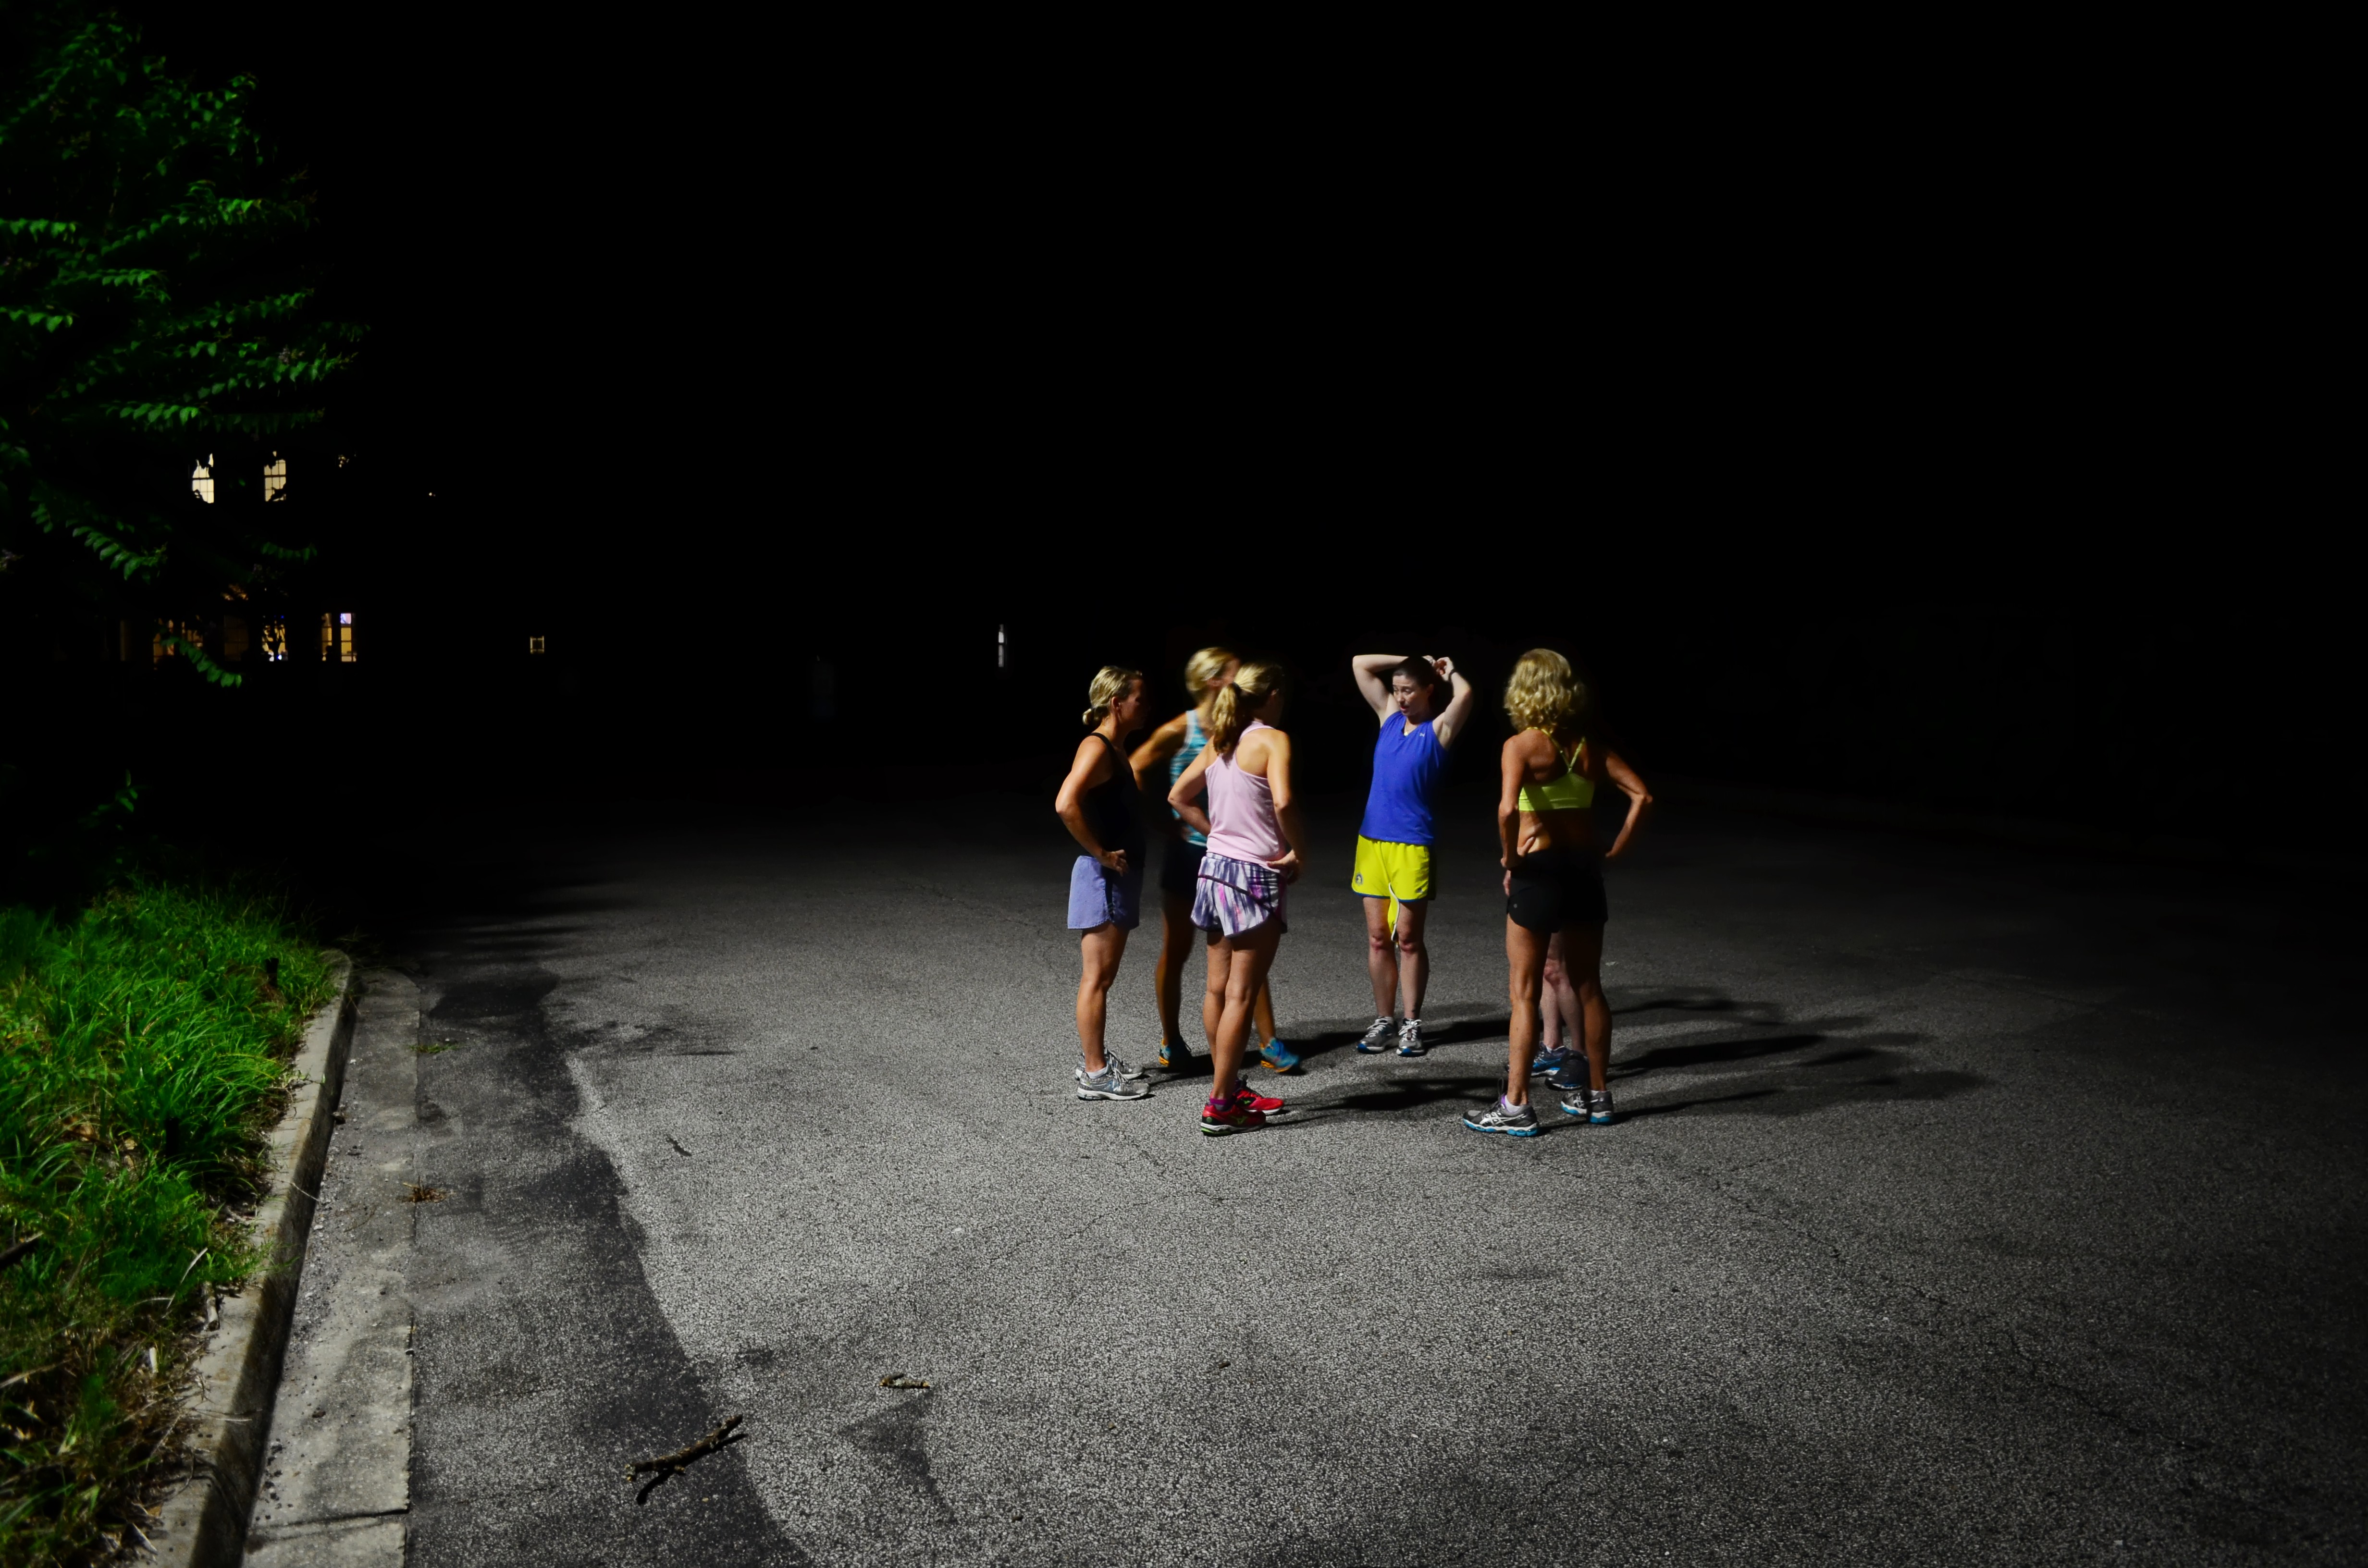 The Dark and Early Runners - 904Fitness